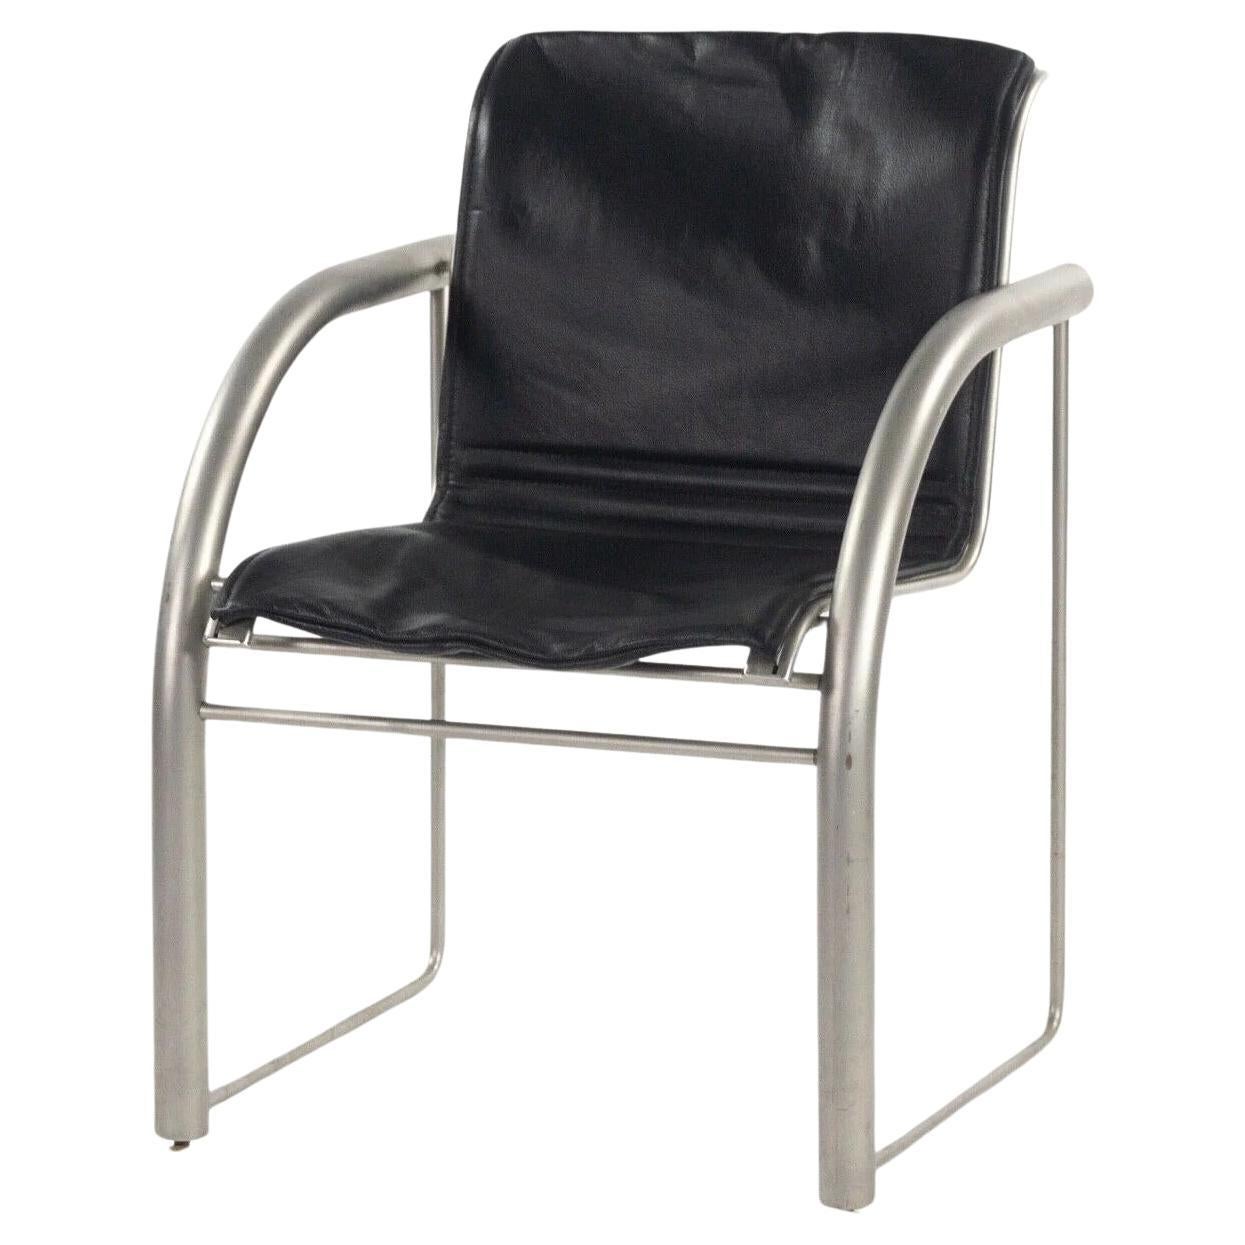 Prototype Richard Schultz 2002 Collection Stainless & Leather Dining Chair For Sale